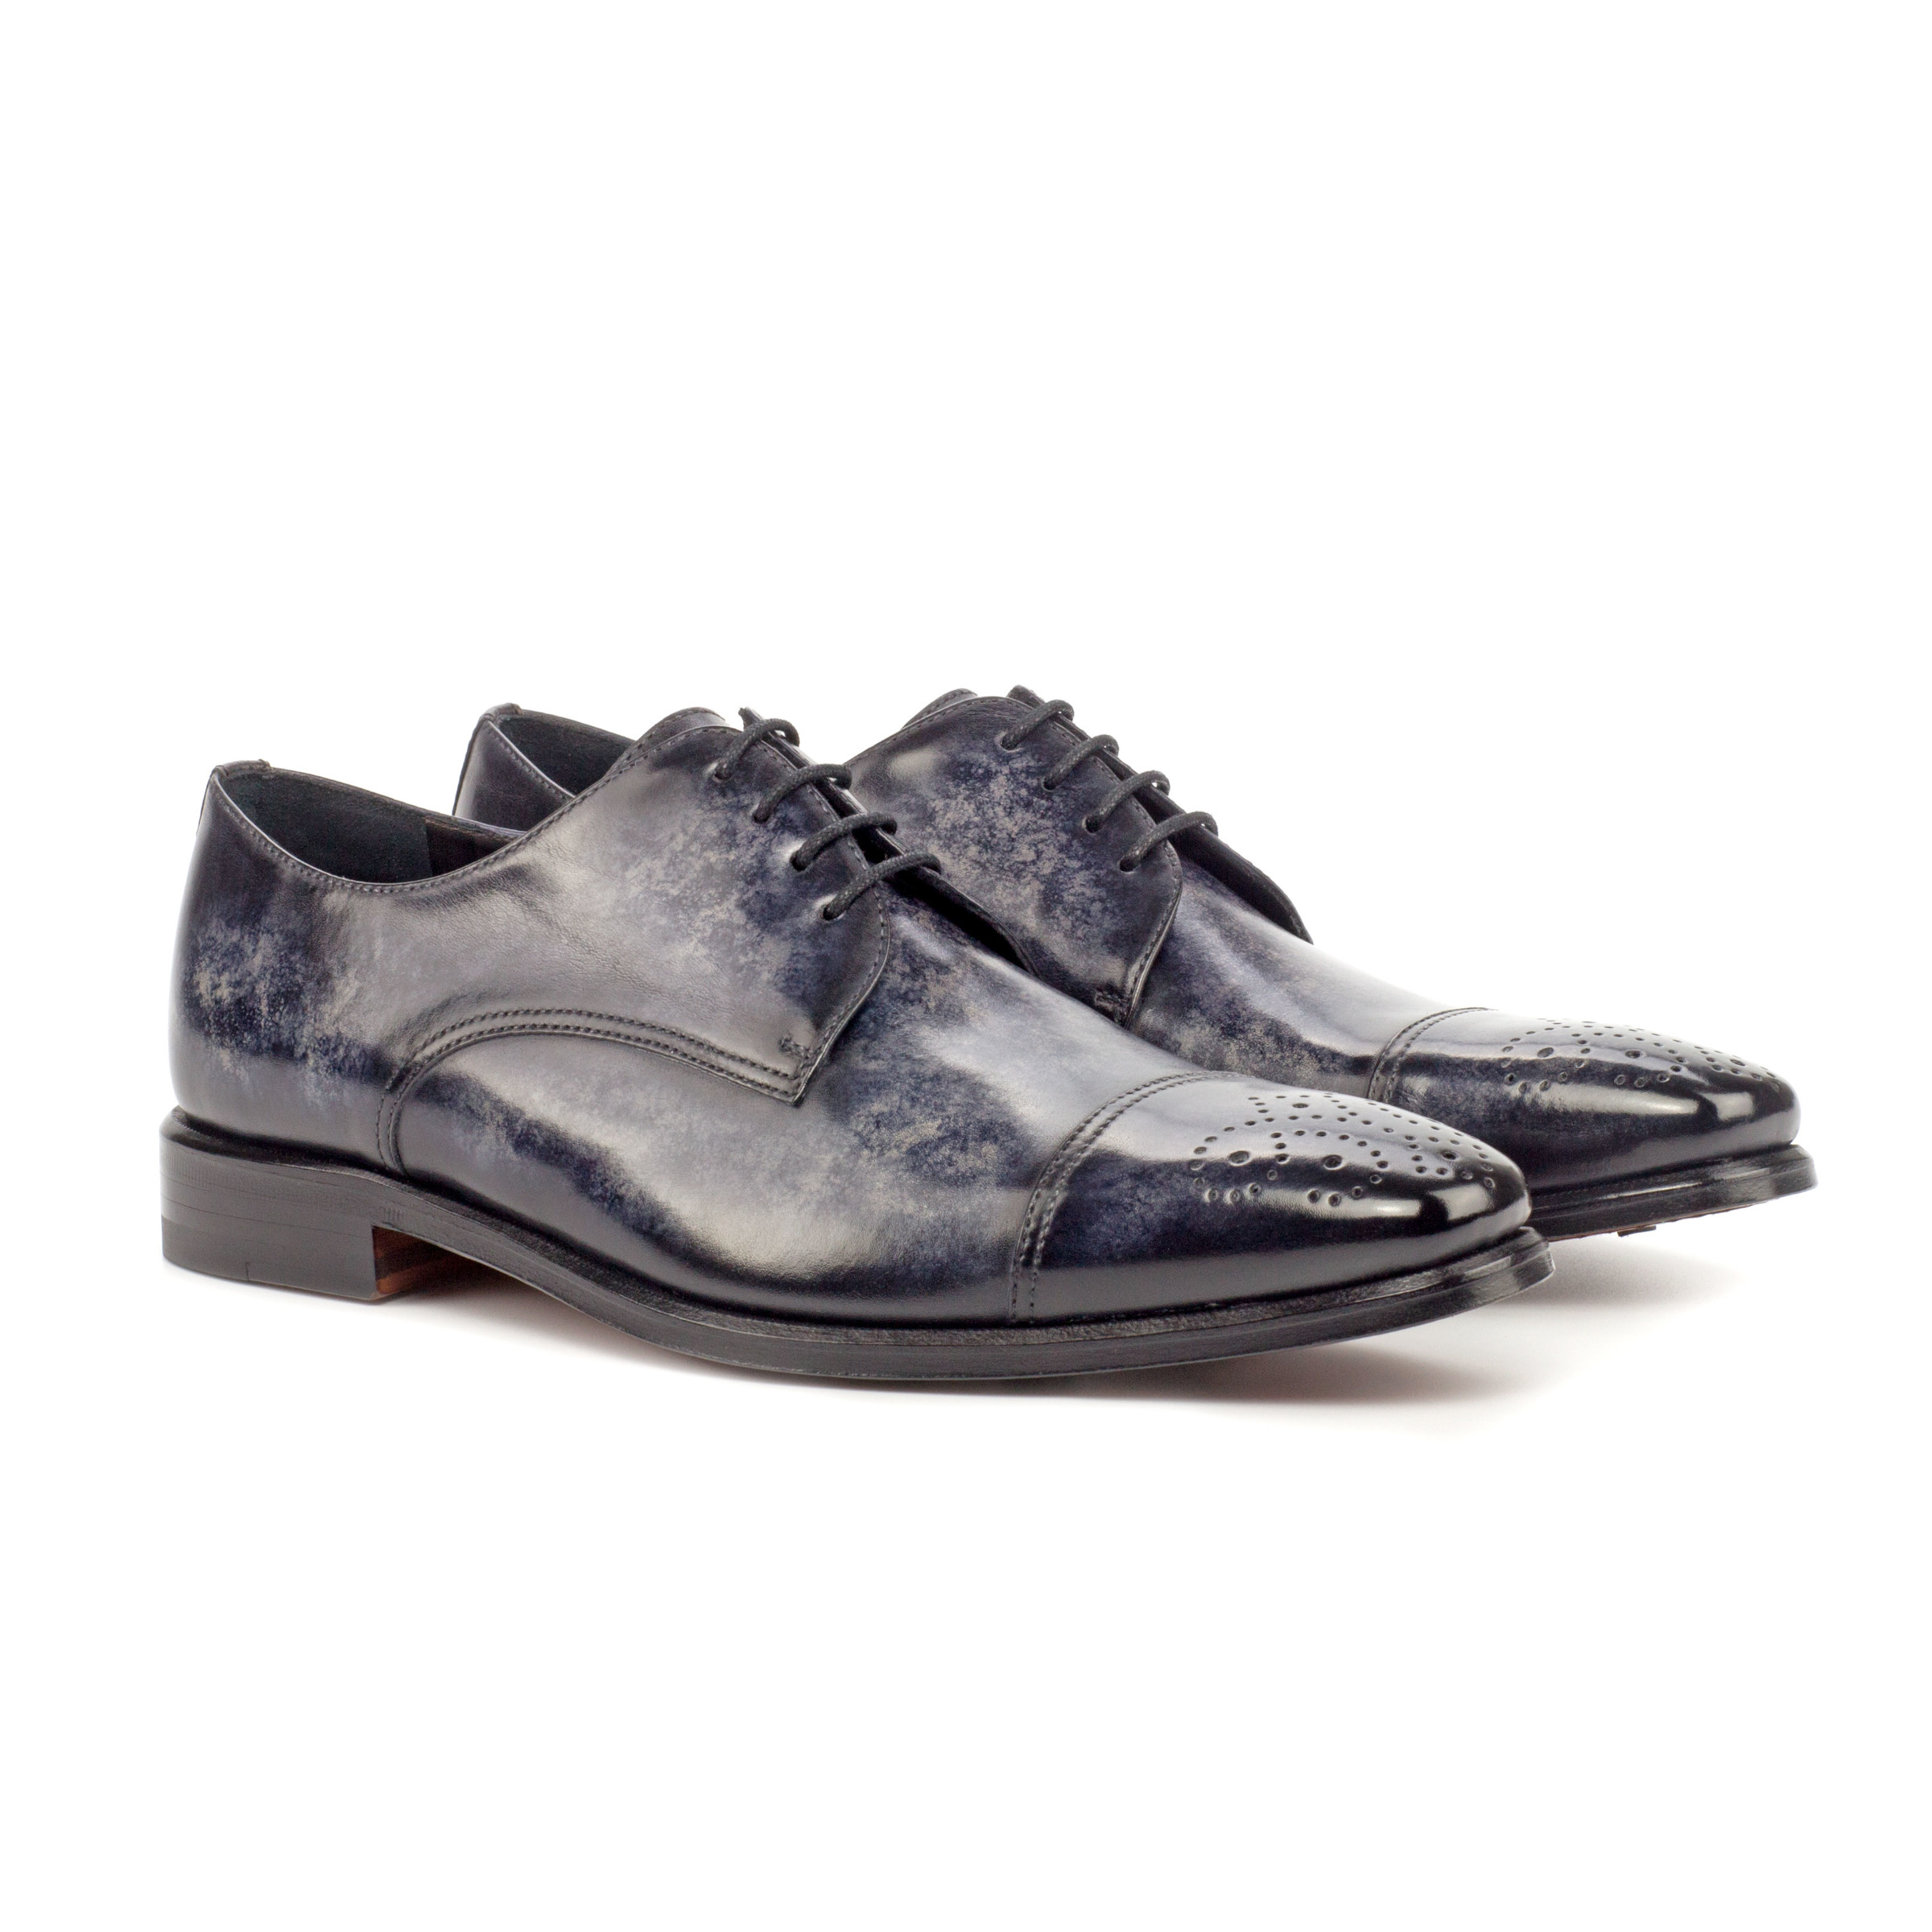 The Latus: Gray Patina Brogue. Front side view of black painted croco and grey patina leather men's style lace up dress shoes on a white background